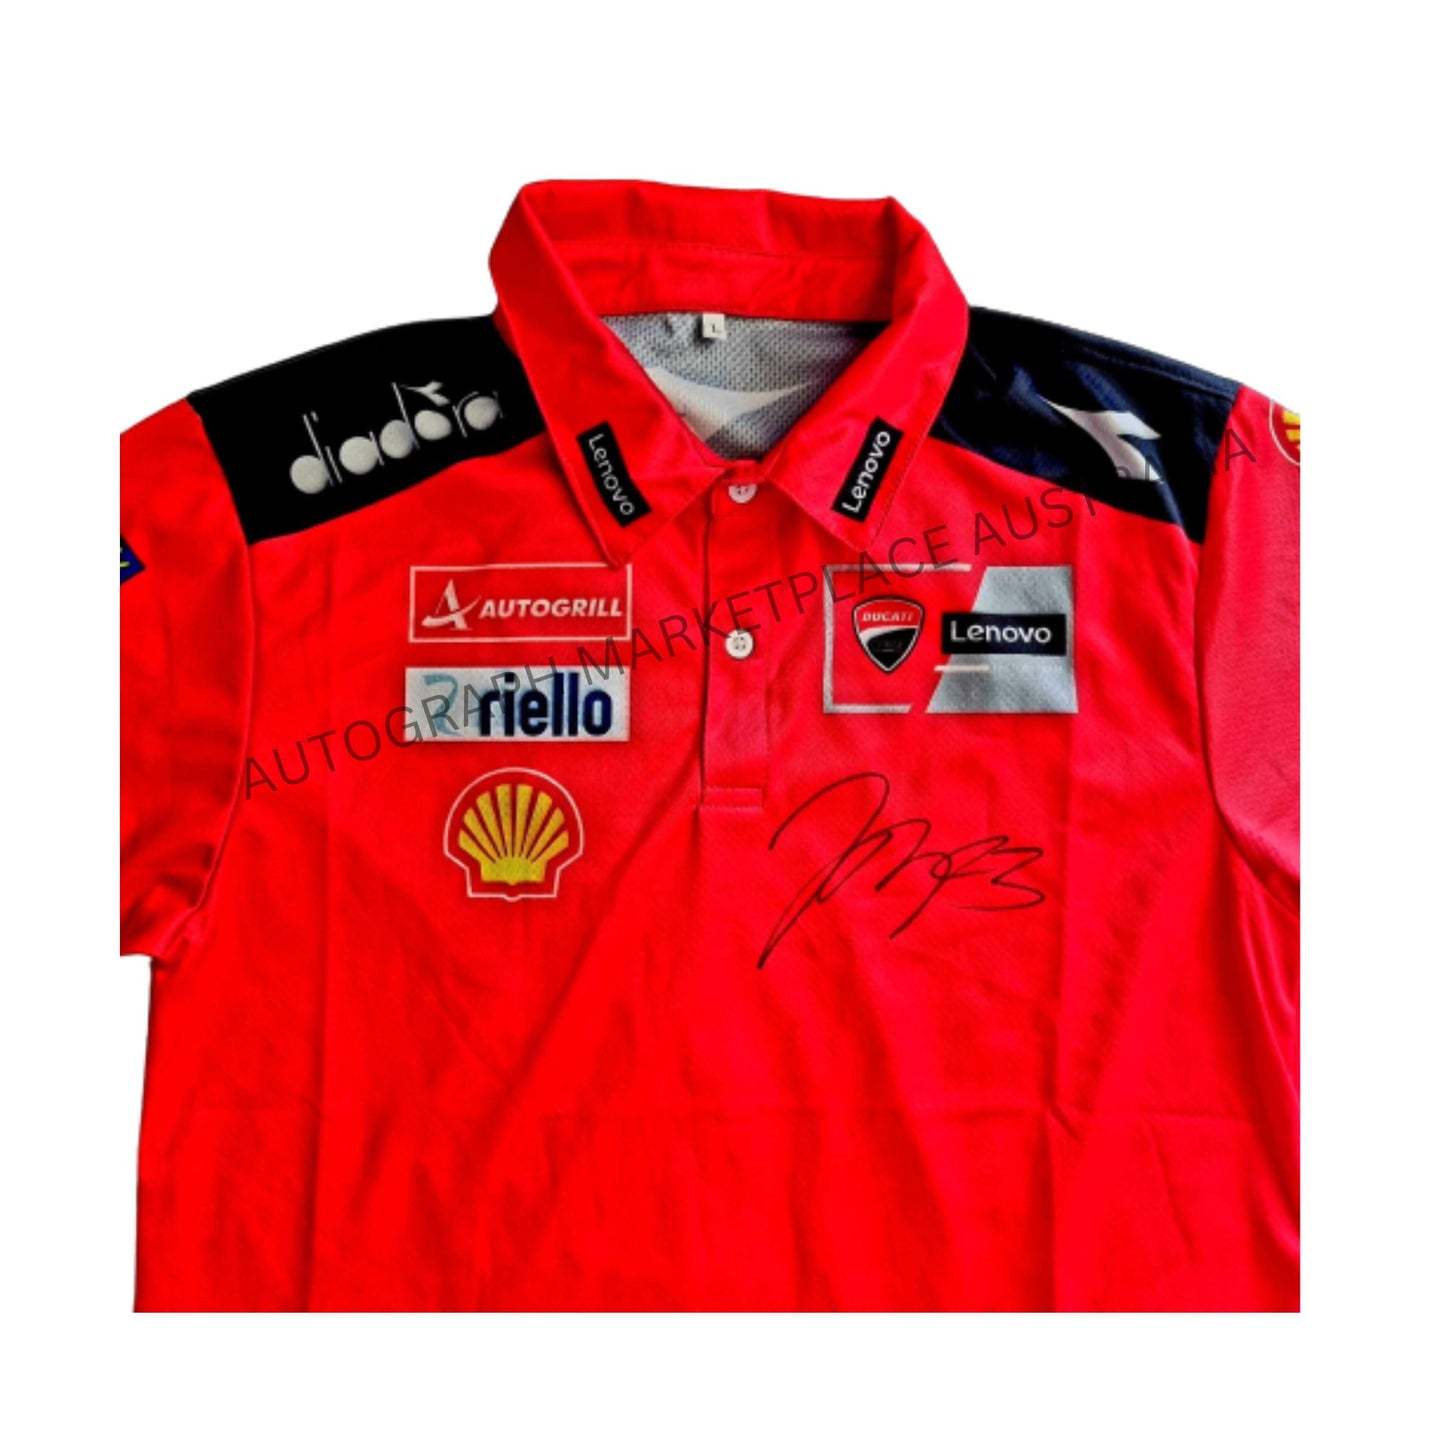 JACK MILLER PERSONALLY AUTOGRAPHED PITCREW SHIRT